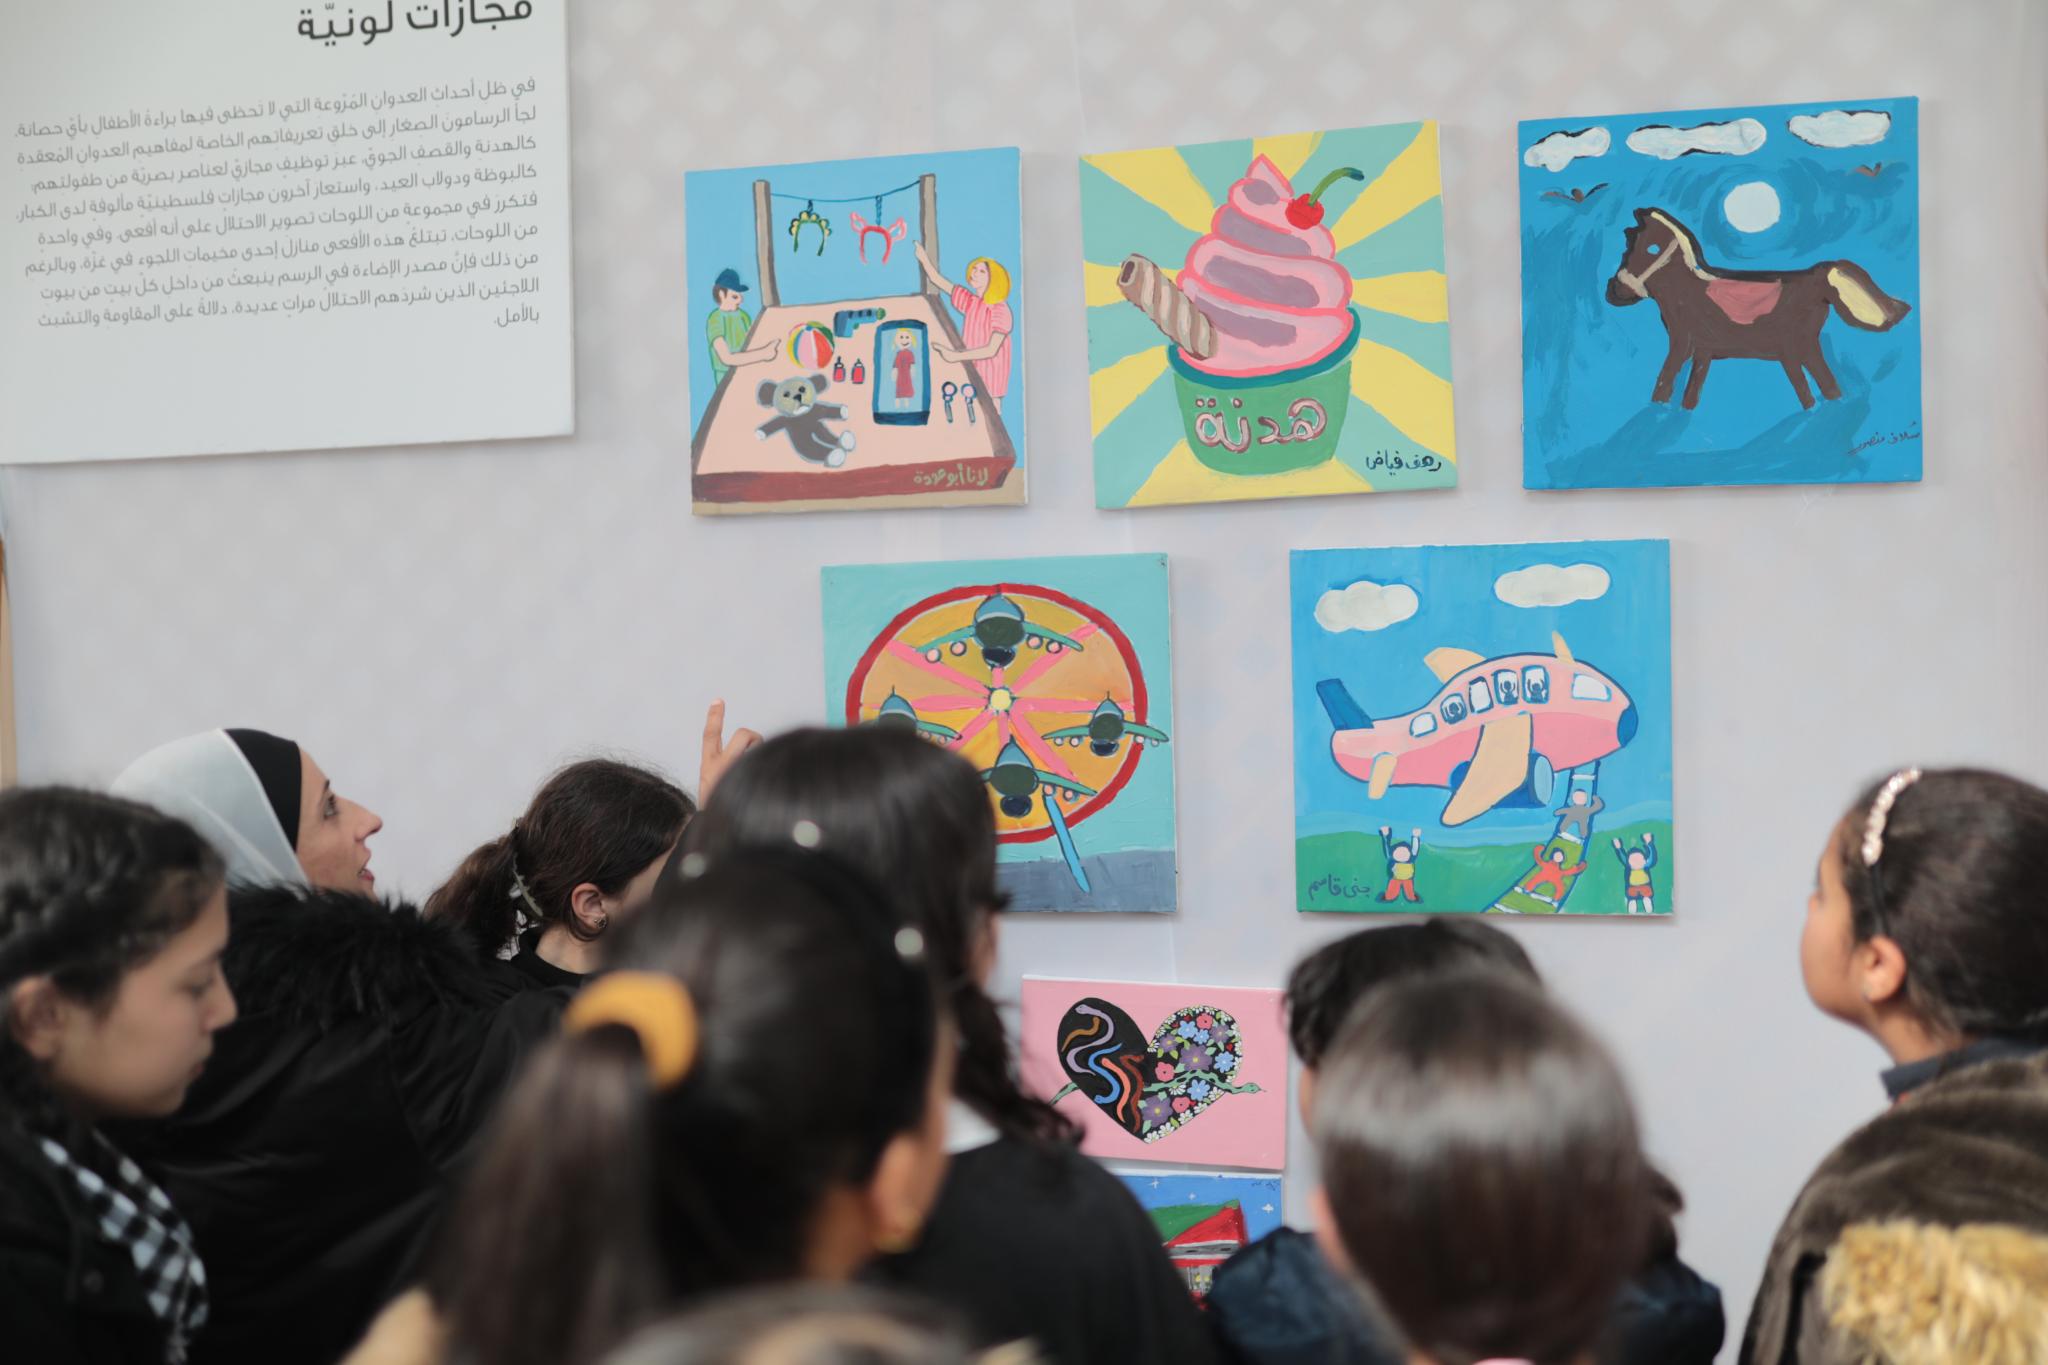 The AAUP Hassib Sabbagh IT Center of Excellence Organizes a Drawing Exhibition Titled “The Scene shall Not Be Gotten Used to by Us”